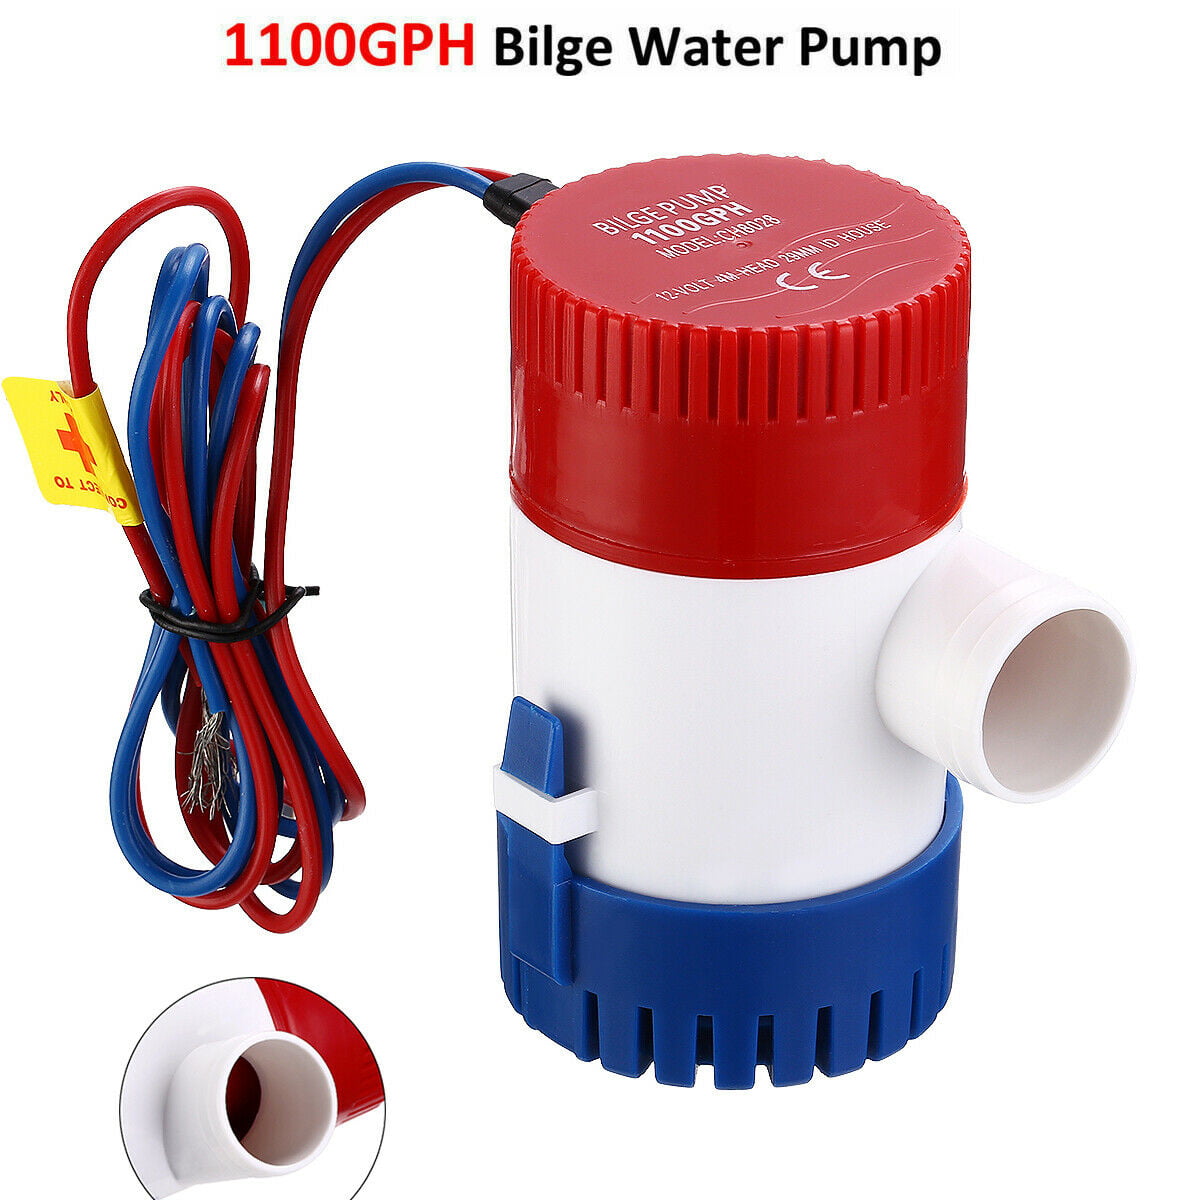 1100GPH 12V Boat Marine Submersible Bilge Sump Water Pump Switch For Boat Yacht 